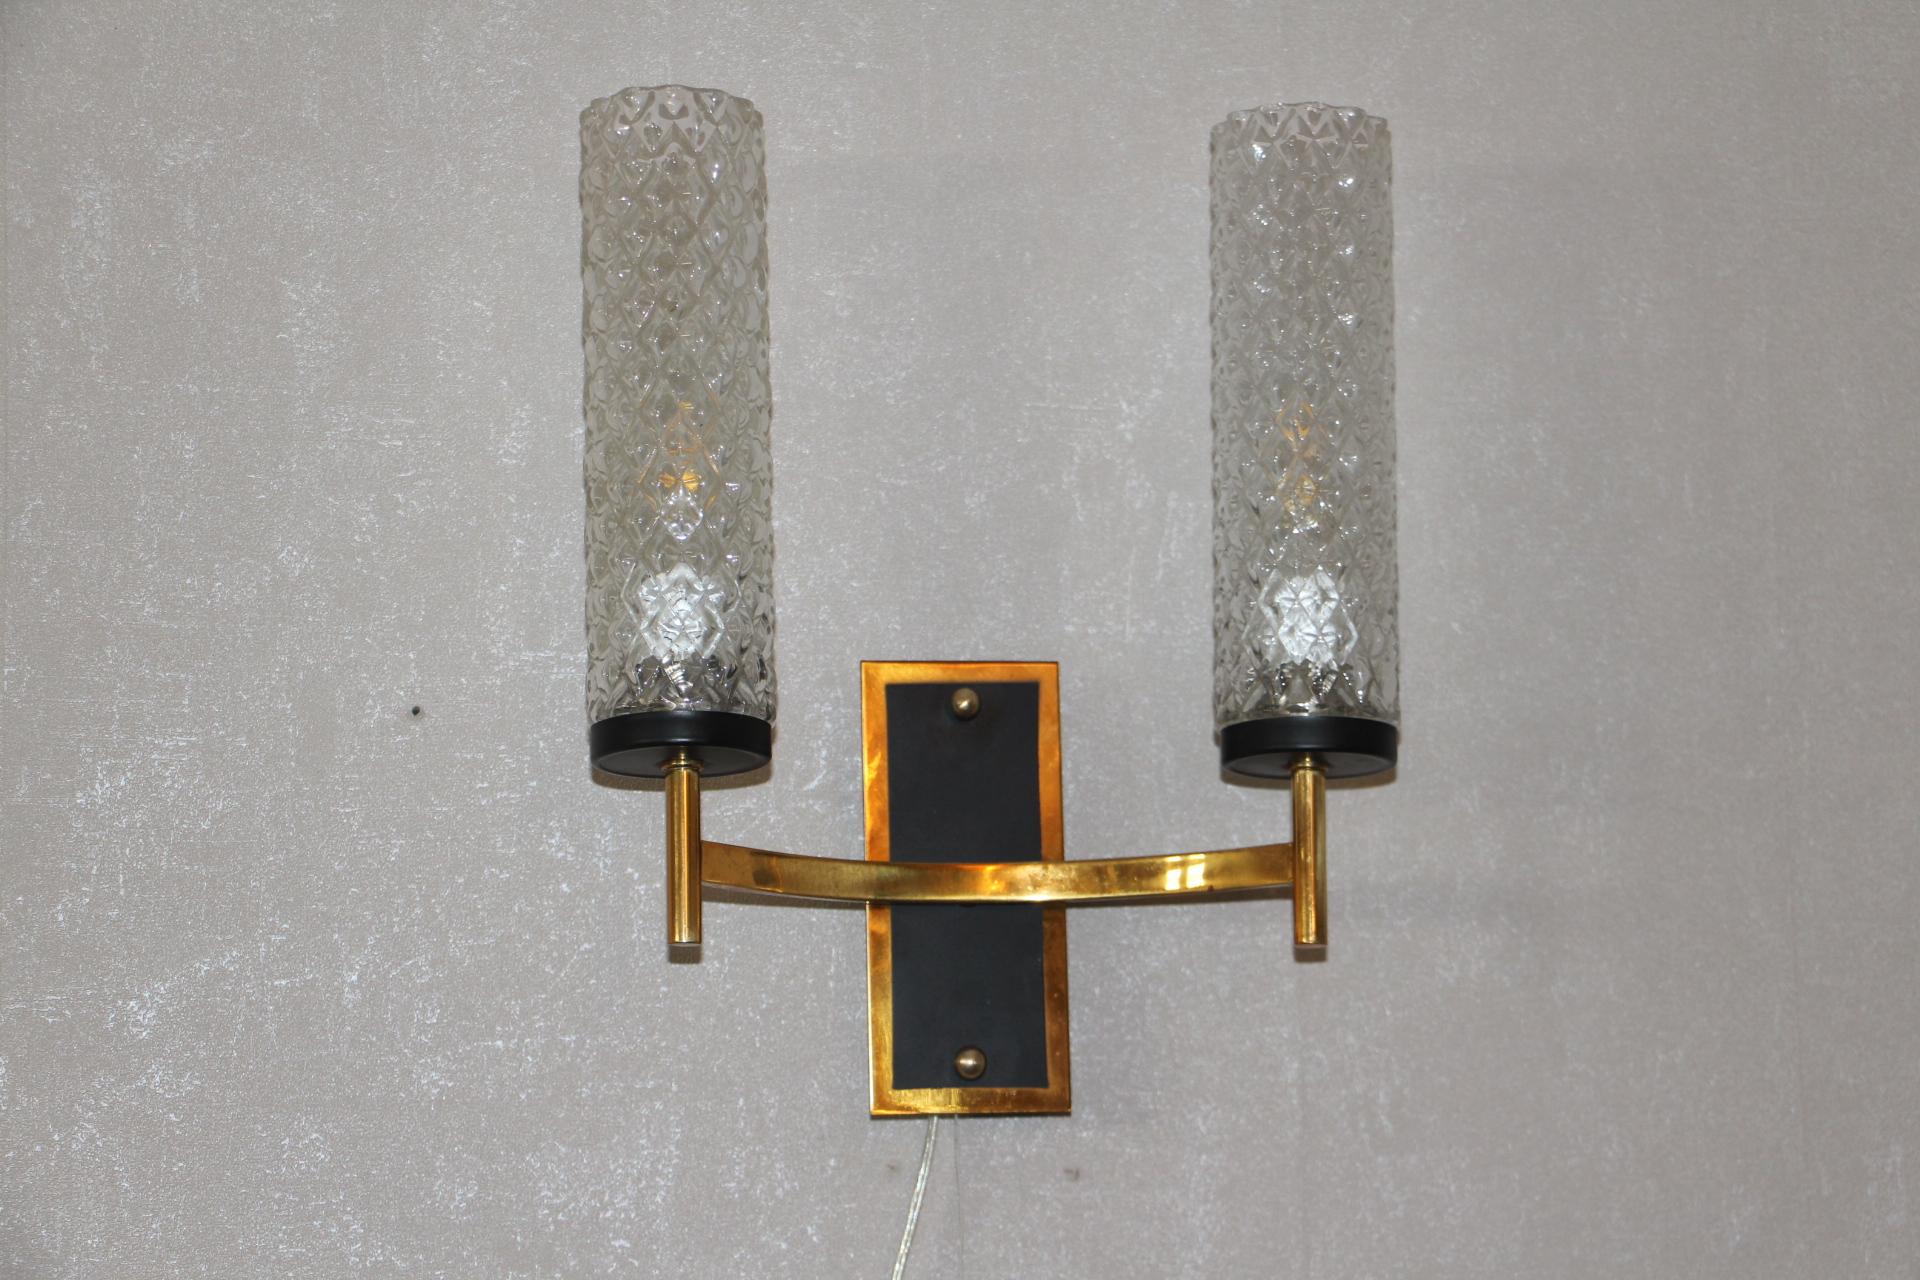 Pair of French Midcentury Sconces, Maison Arlus, Lunel Wall Lights For Sale 5